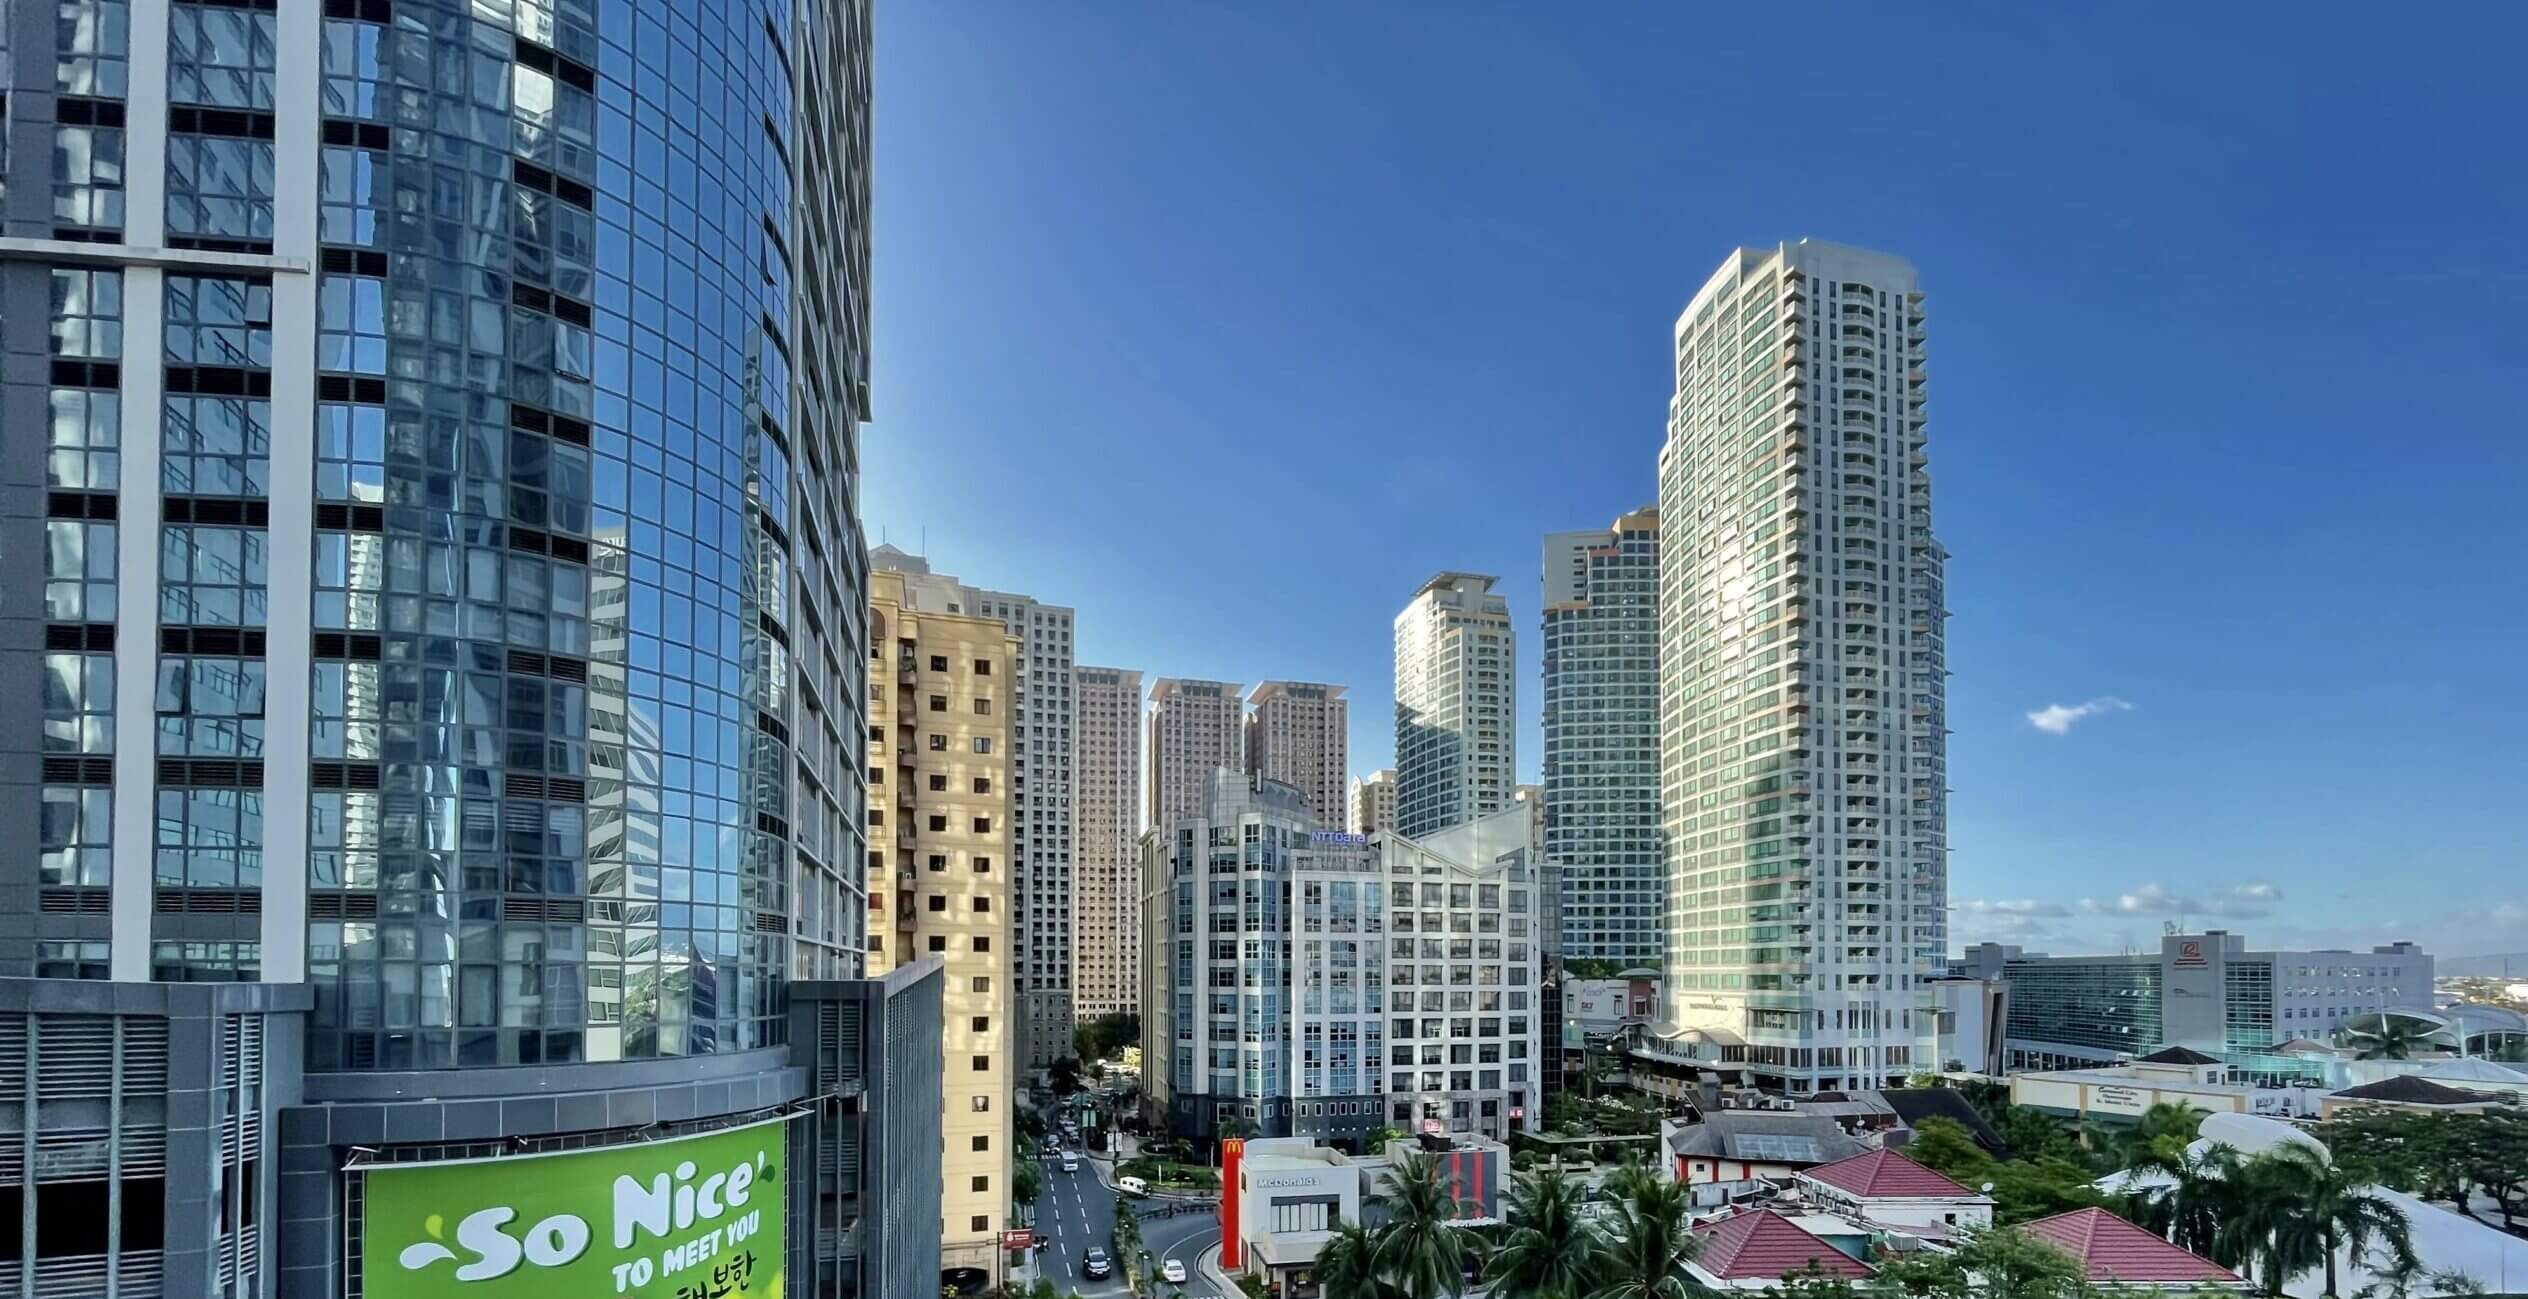 Intelassist's office is located in Eastwood City